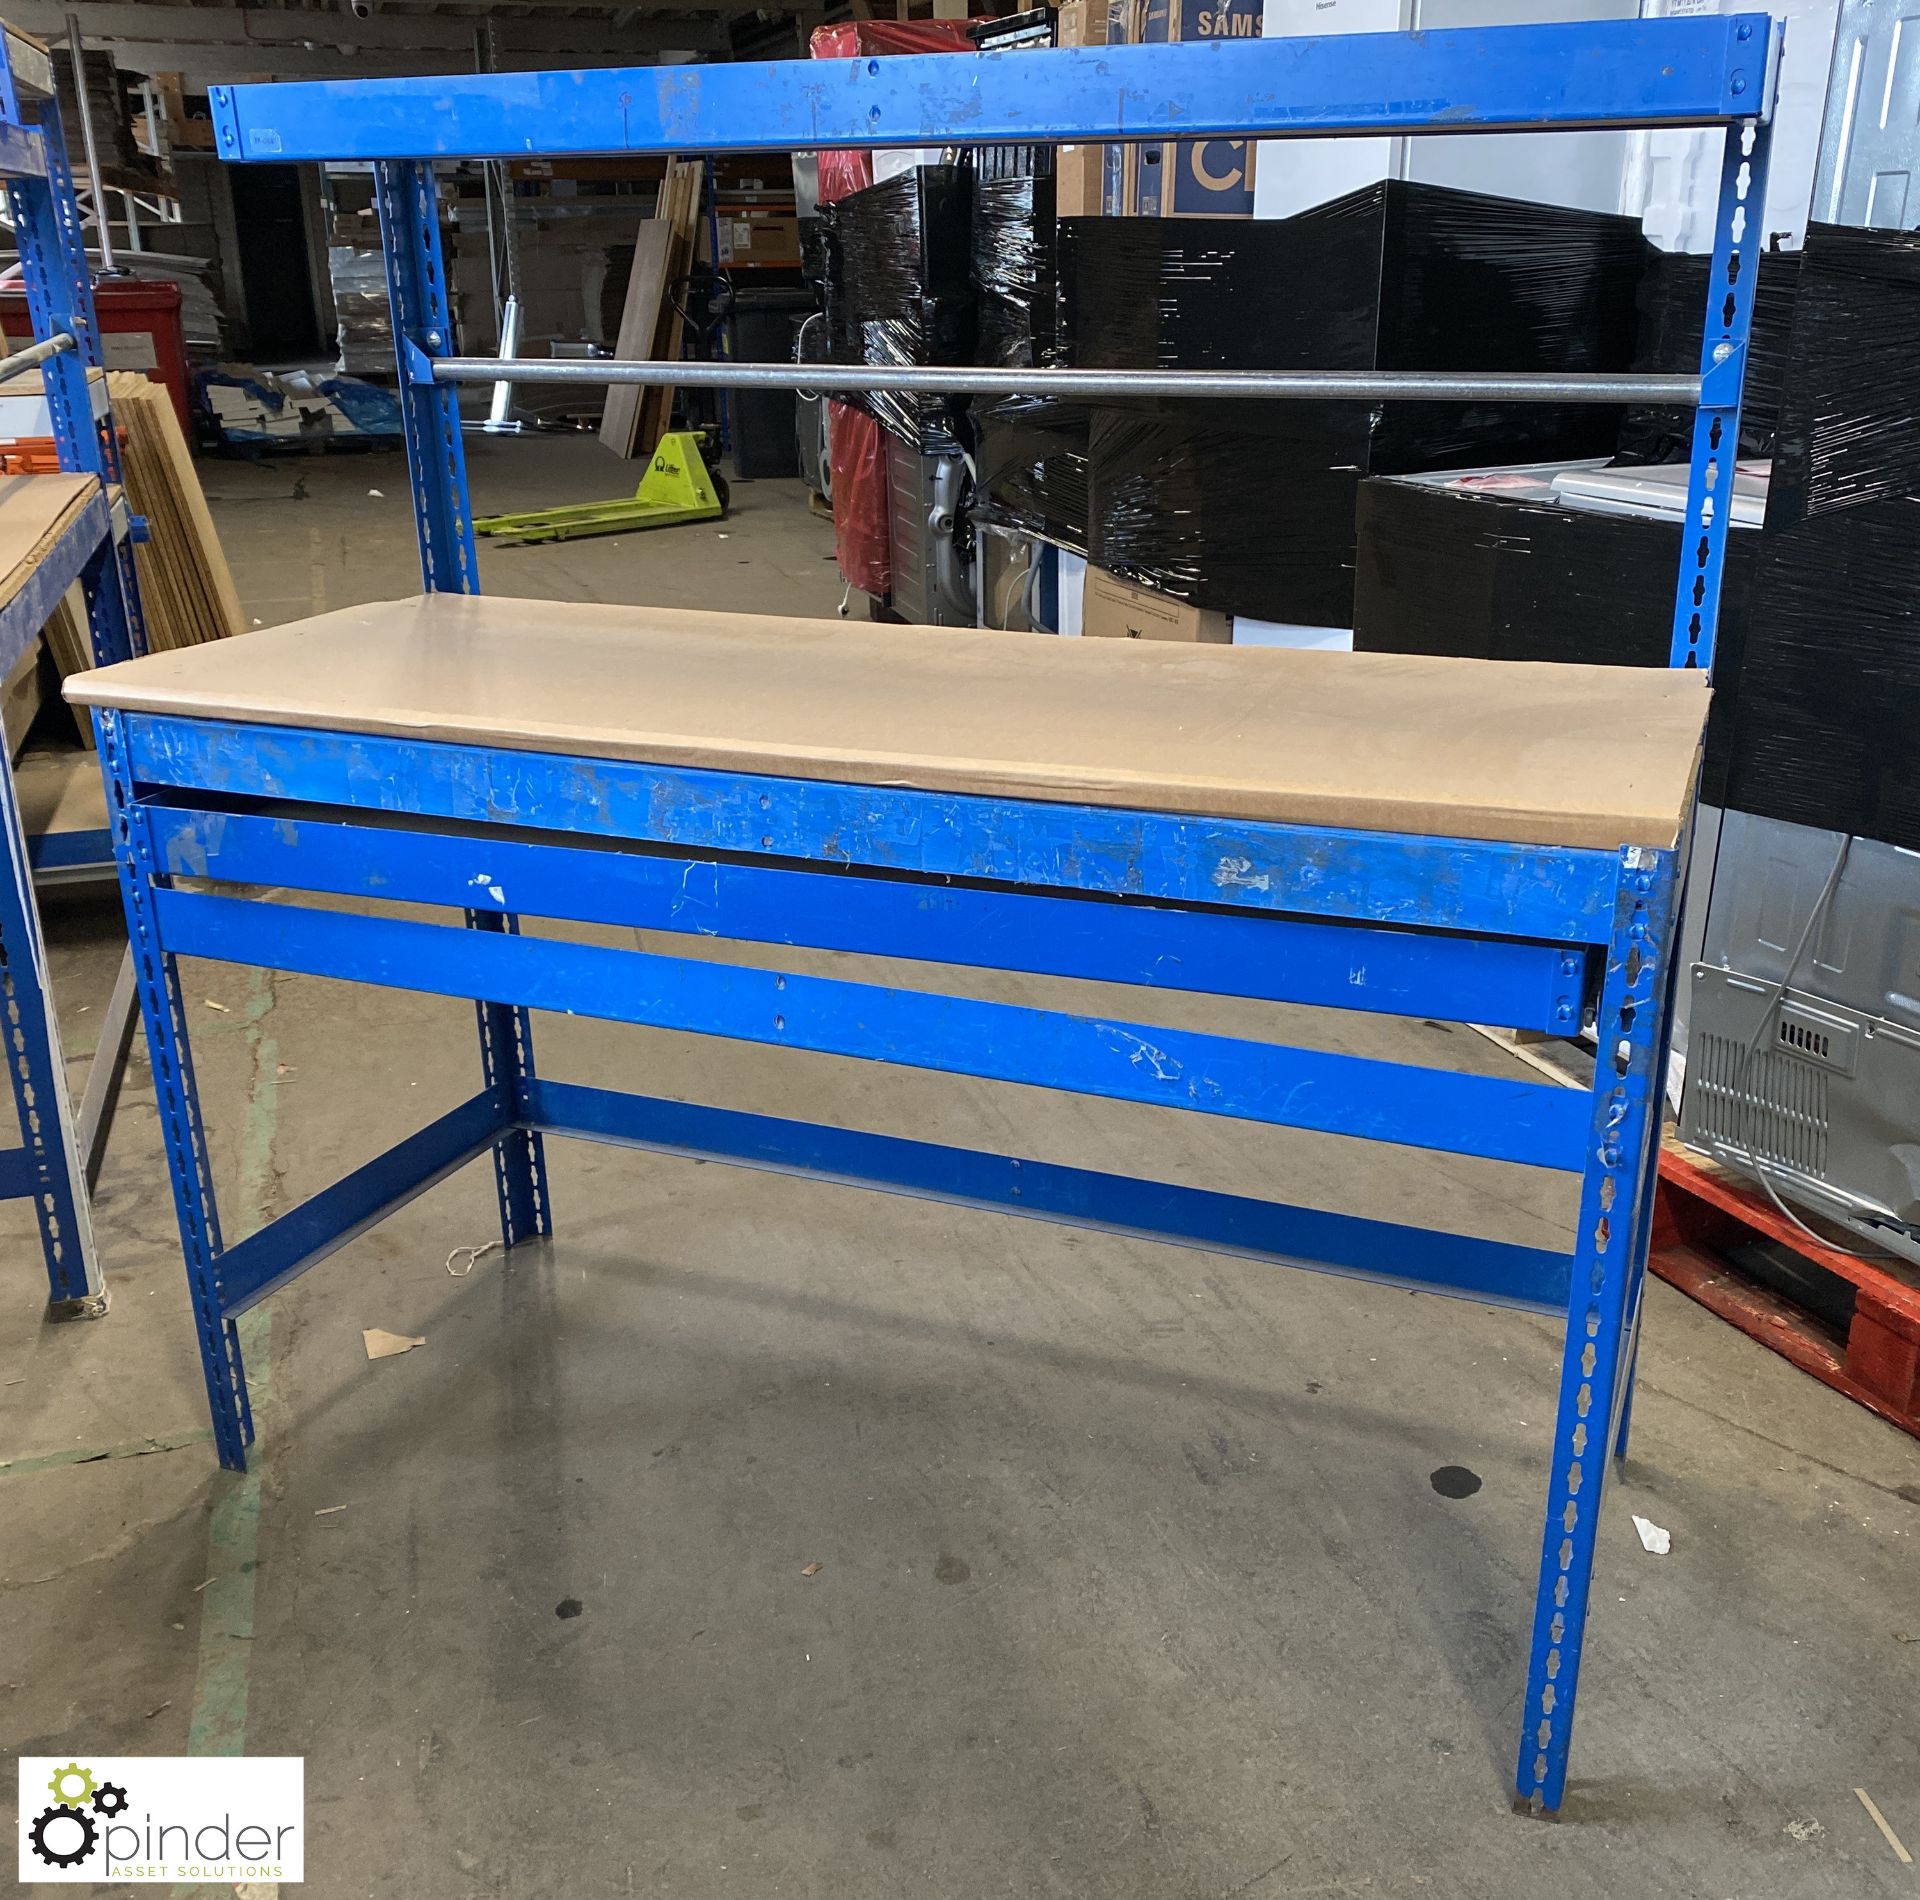 2 adjustable Assembly Benches, 1540mm x 910mm (bench height), with shelf